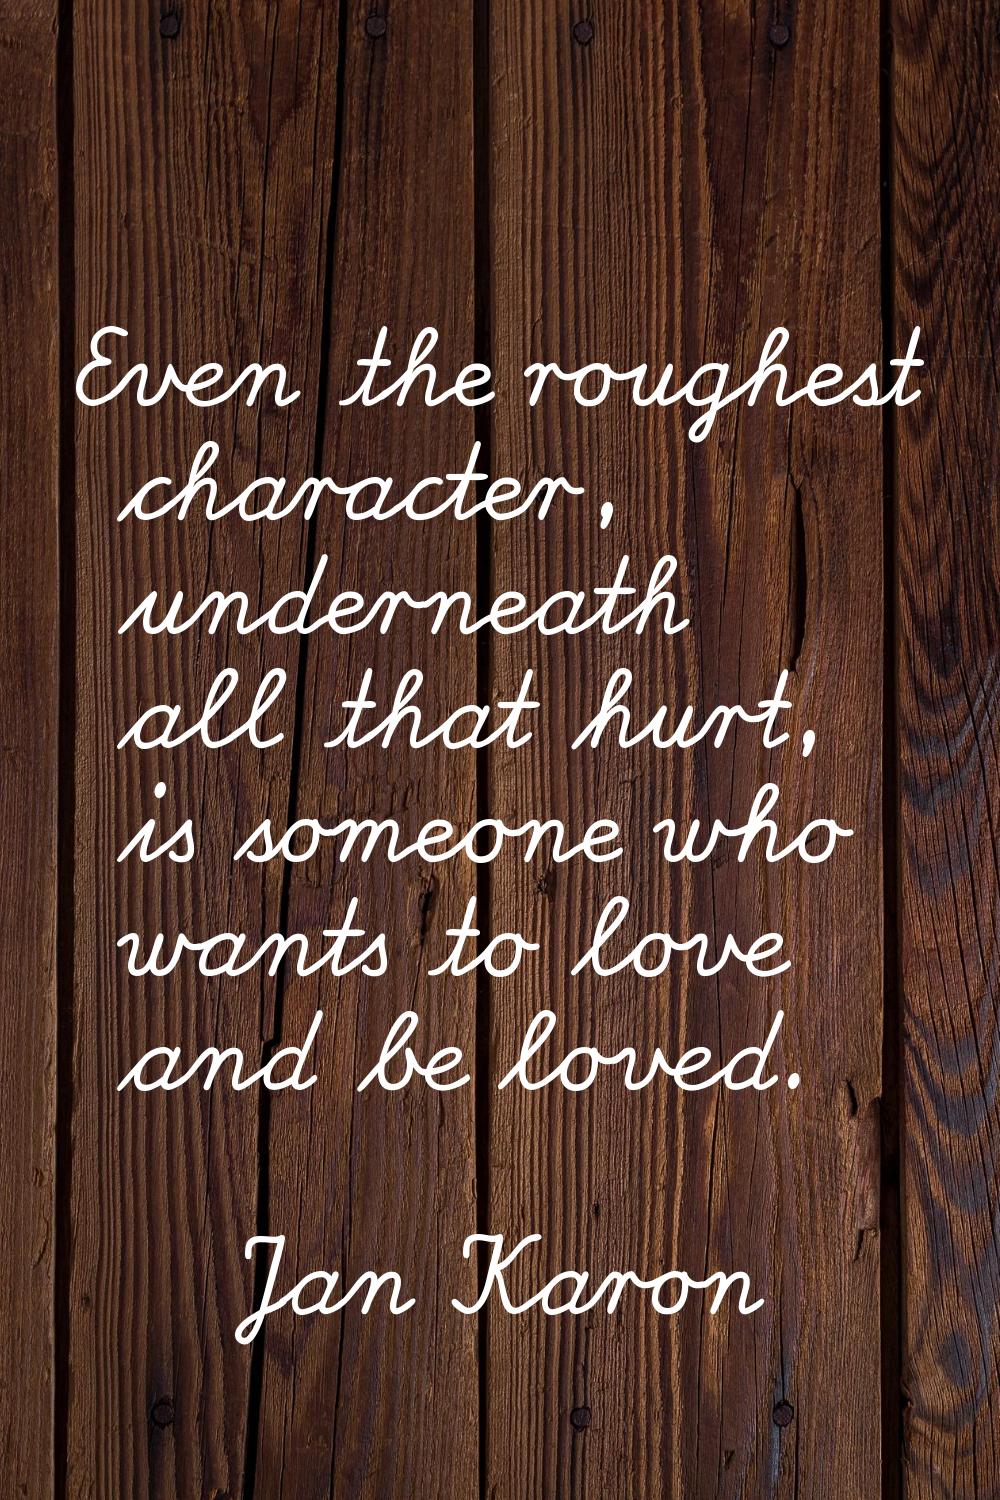 Even the roughest character, underneath all that hurt, is someone who wants to love and be loved.